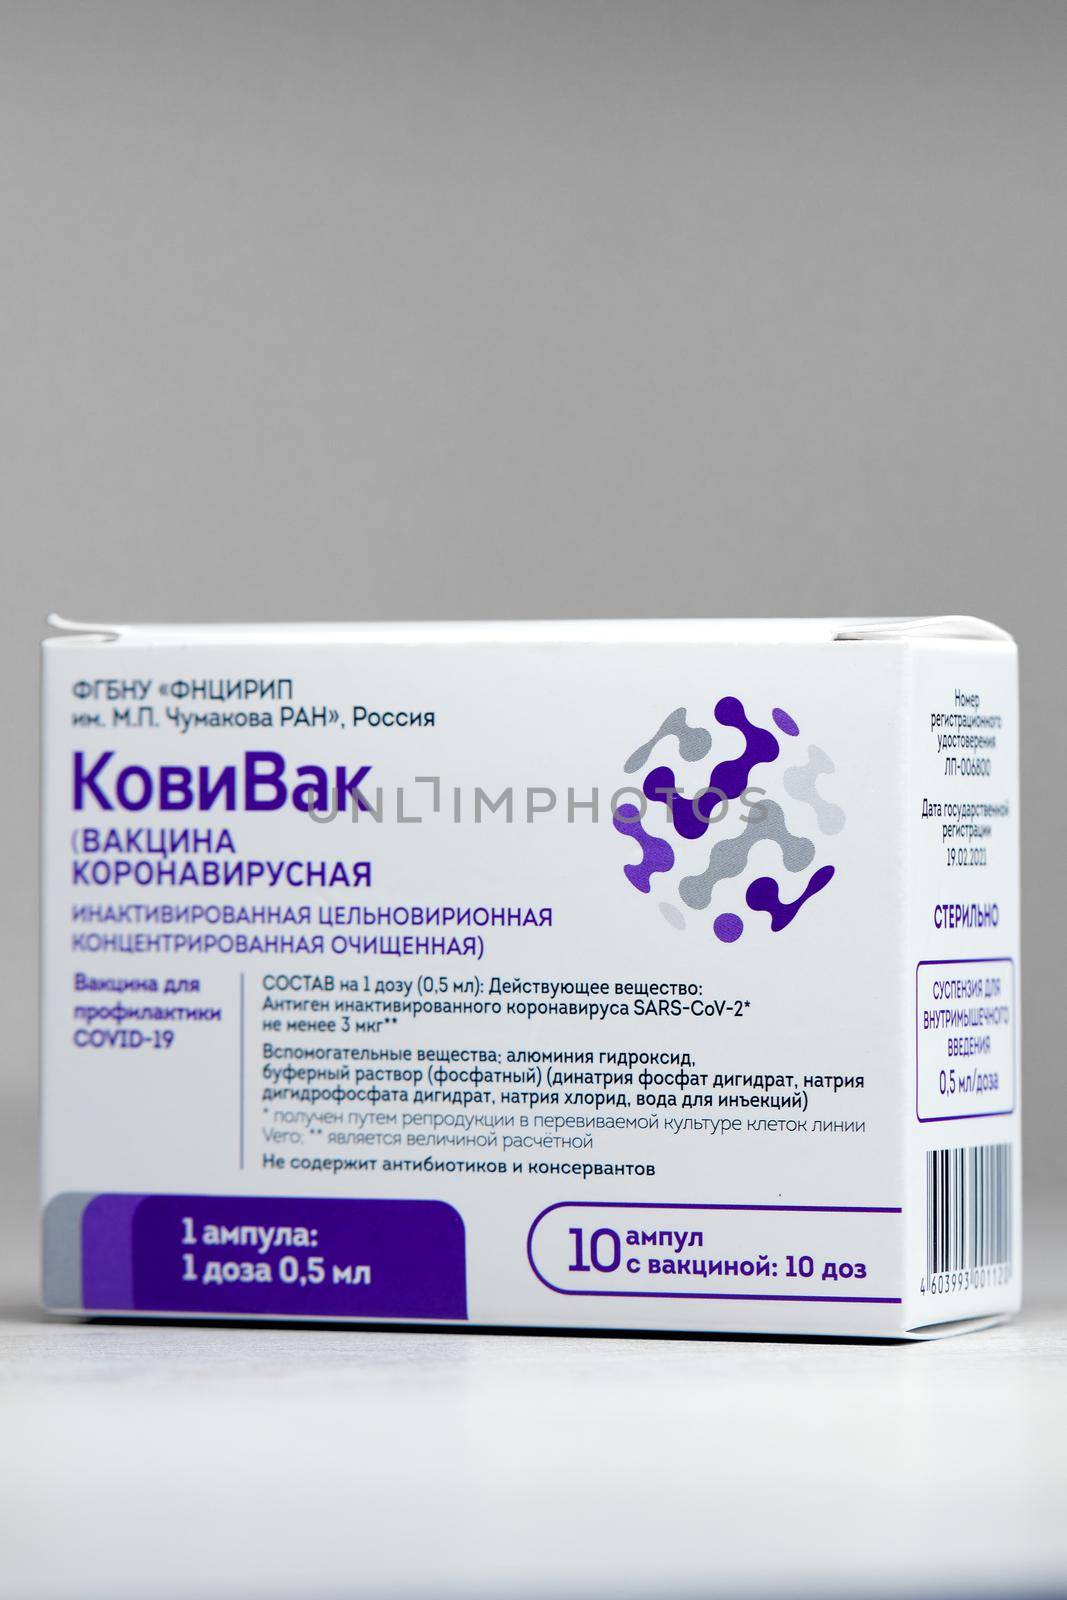 Box with new Russian vaccine against coronavirus SARS-CoV-2, CoviVac. CoviVac is developed by the Chumakov Centre. Vaccine for prevention COVID-19. 26.08.2021, Moscow, Russia by EvgeniyQW